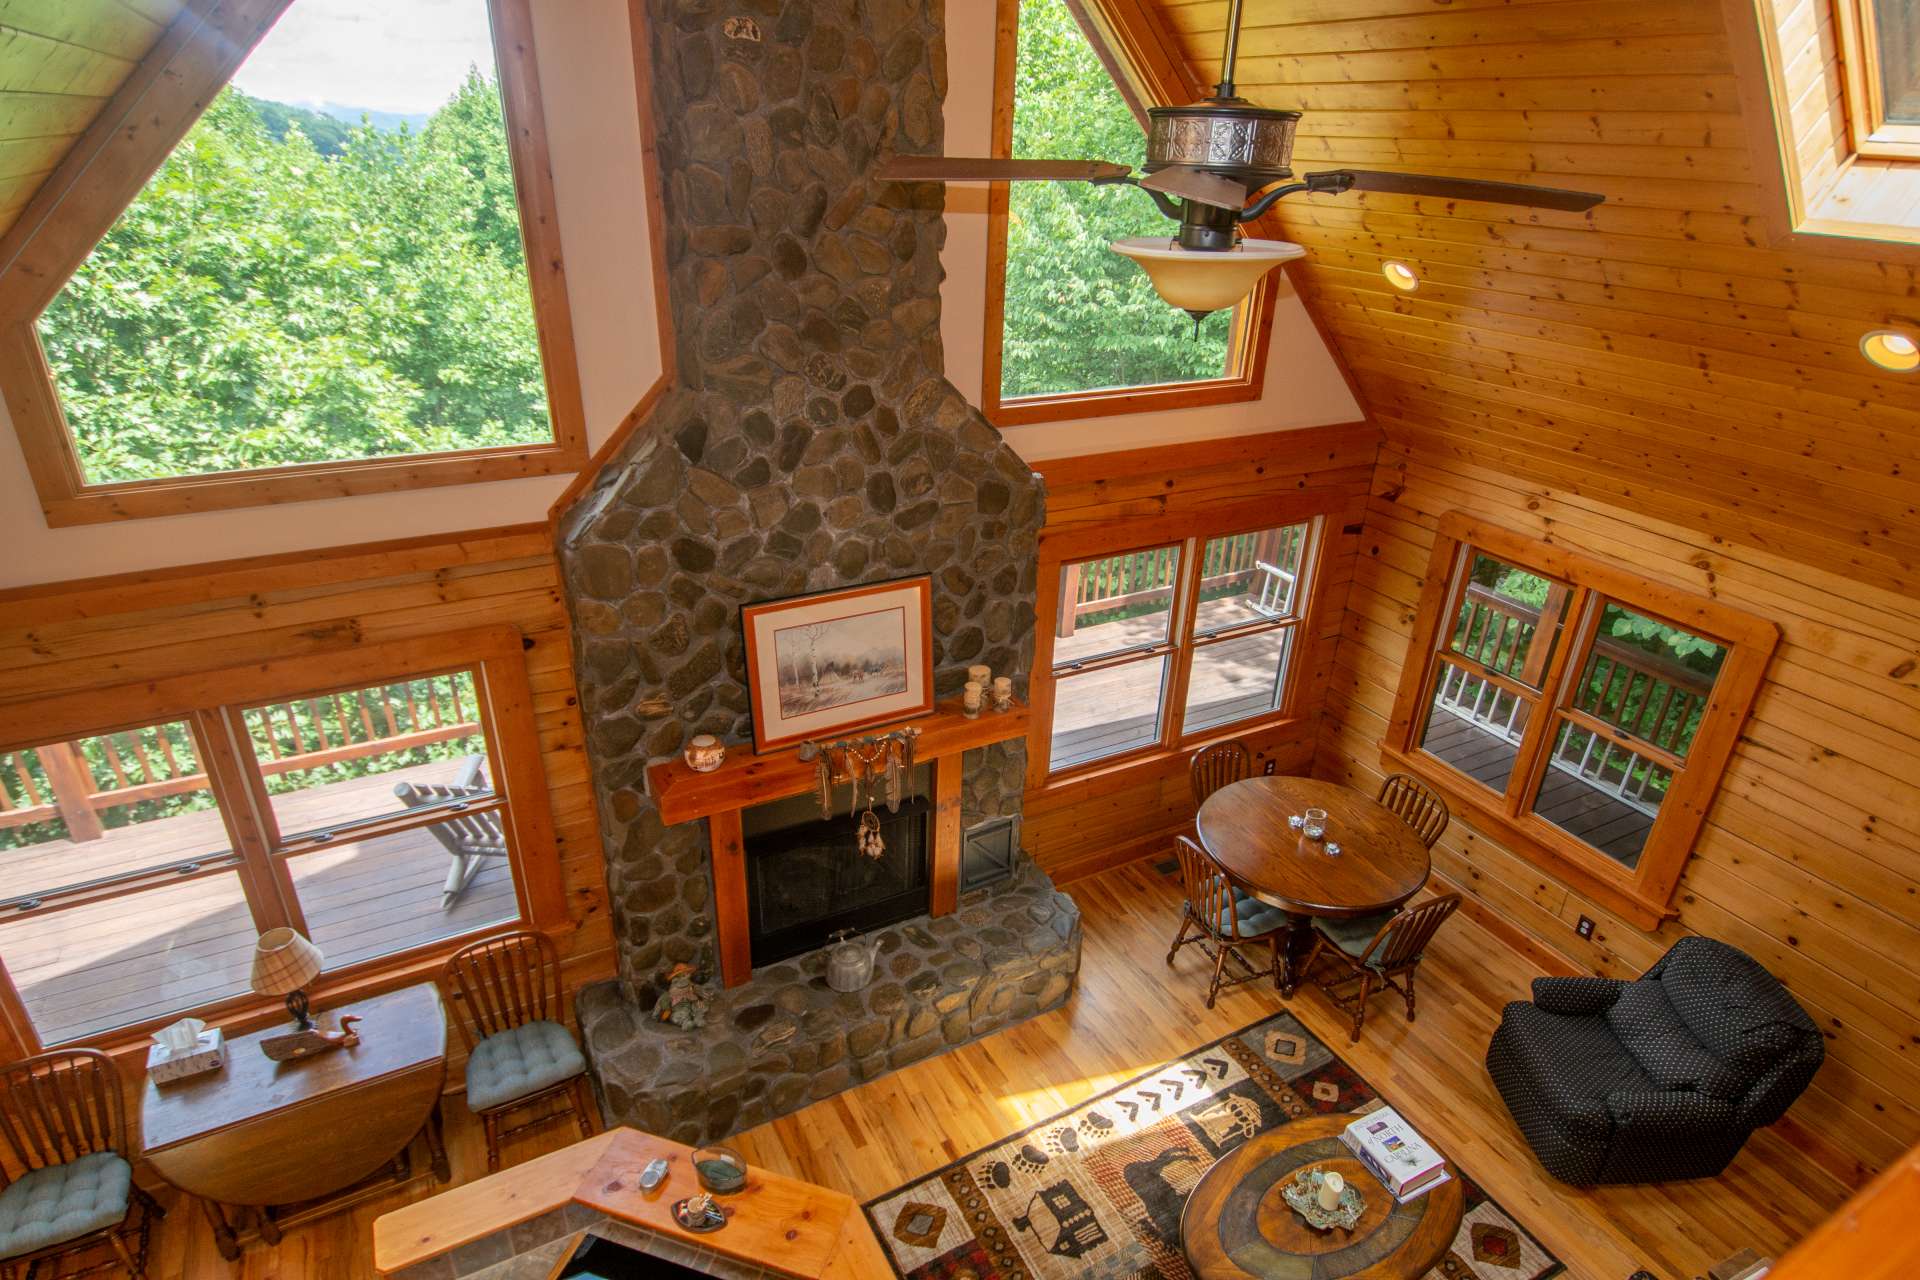 Welcoming you home, this native Ashe County river rock fireplace features easy care gas logs and a stunning heavy beamed mantle.